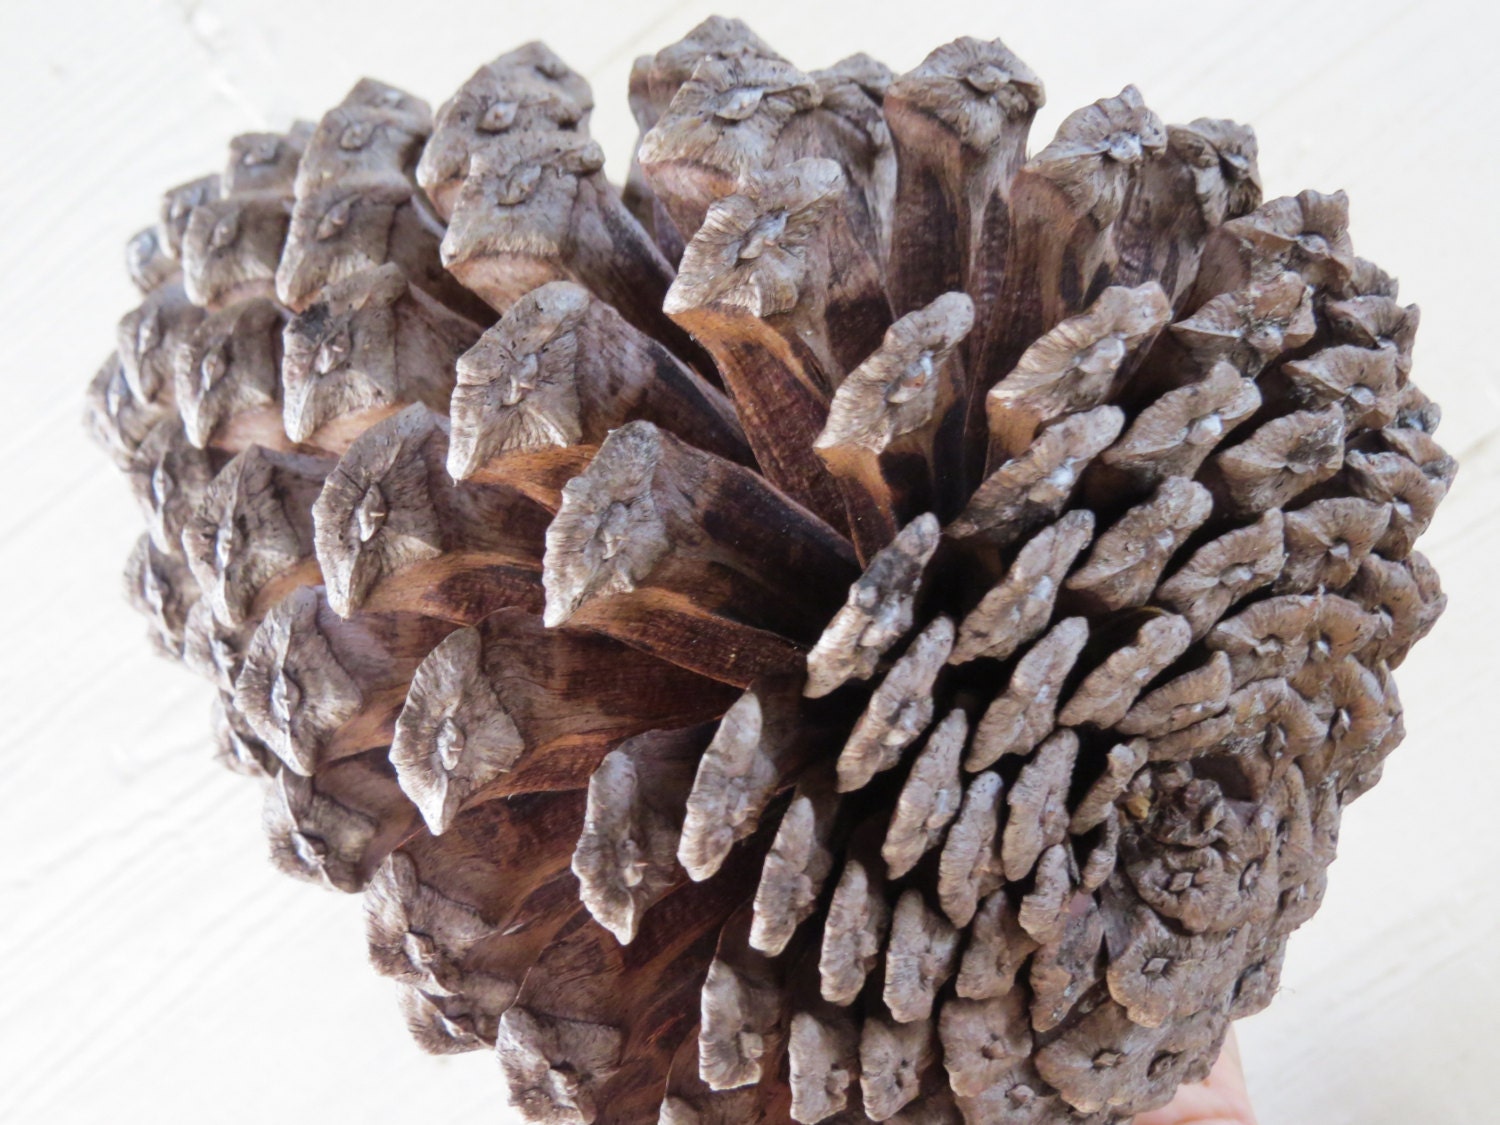 BigOtters 10PCS Large Pinecones for Decorating Natural Pine Cones for  Crafts